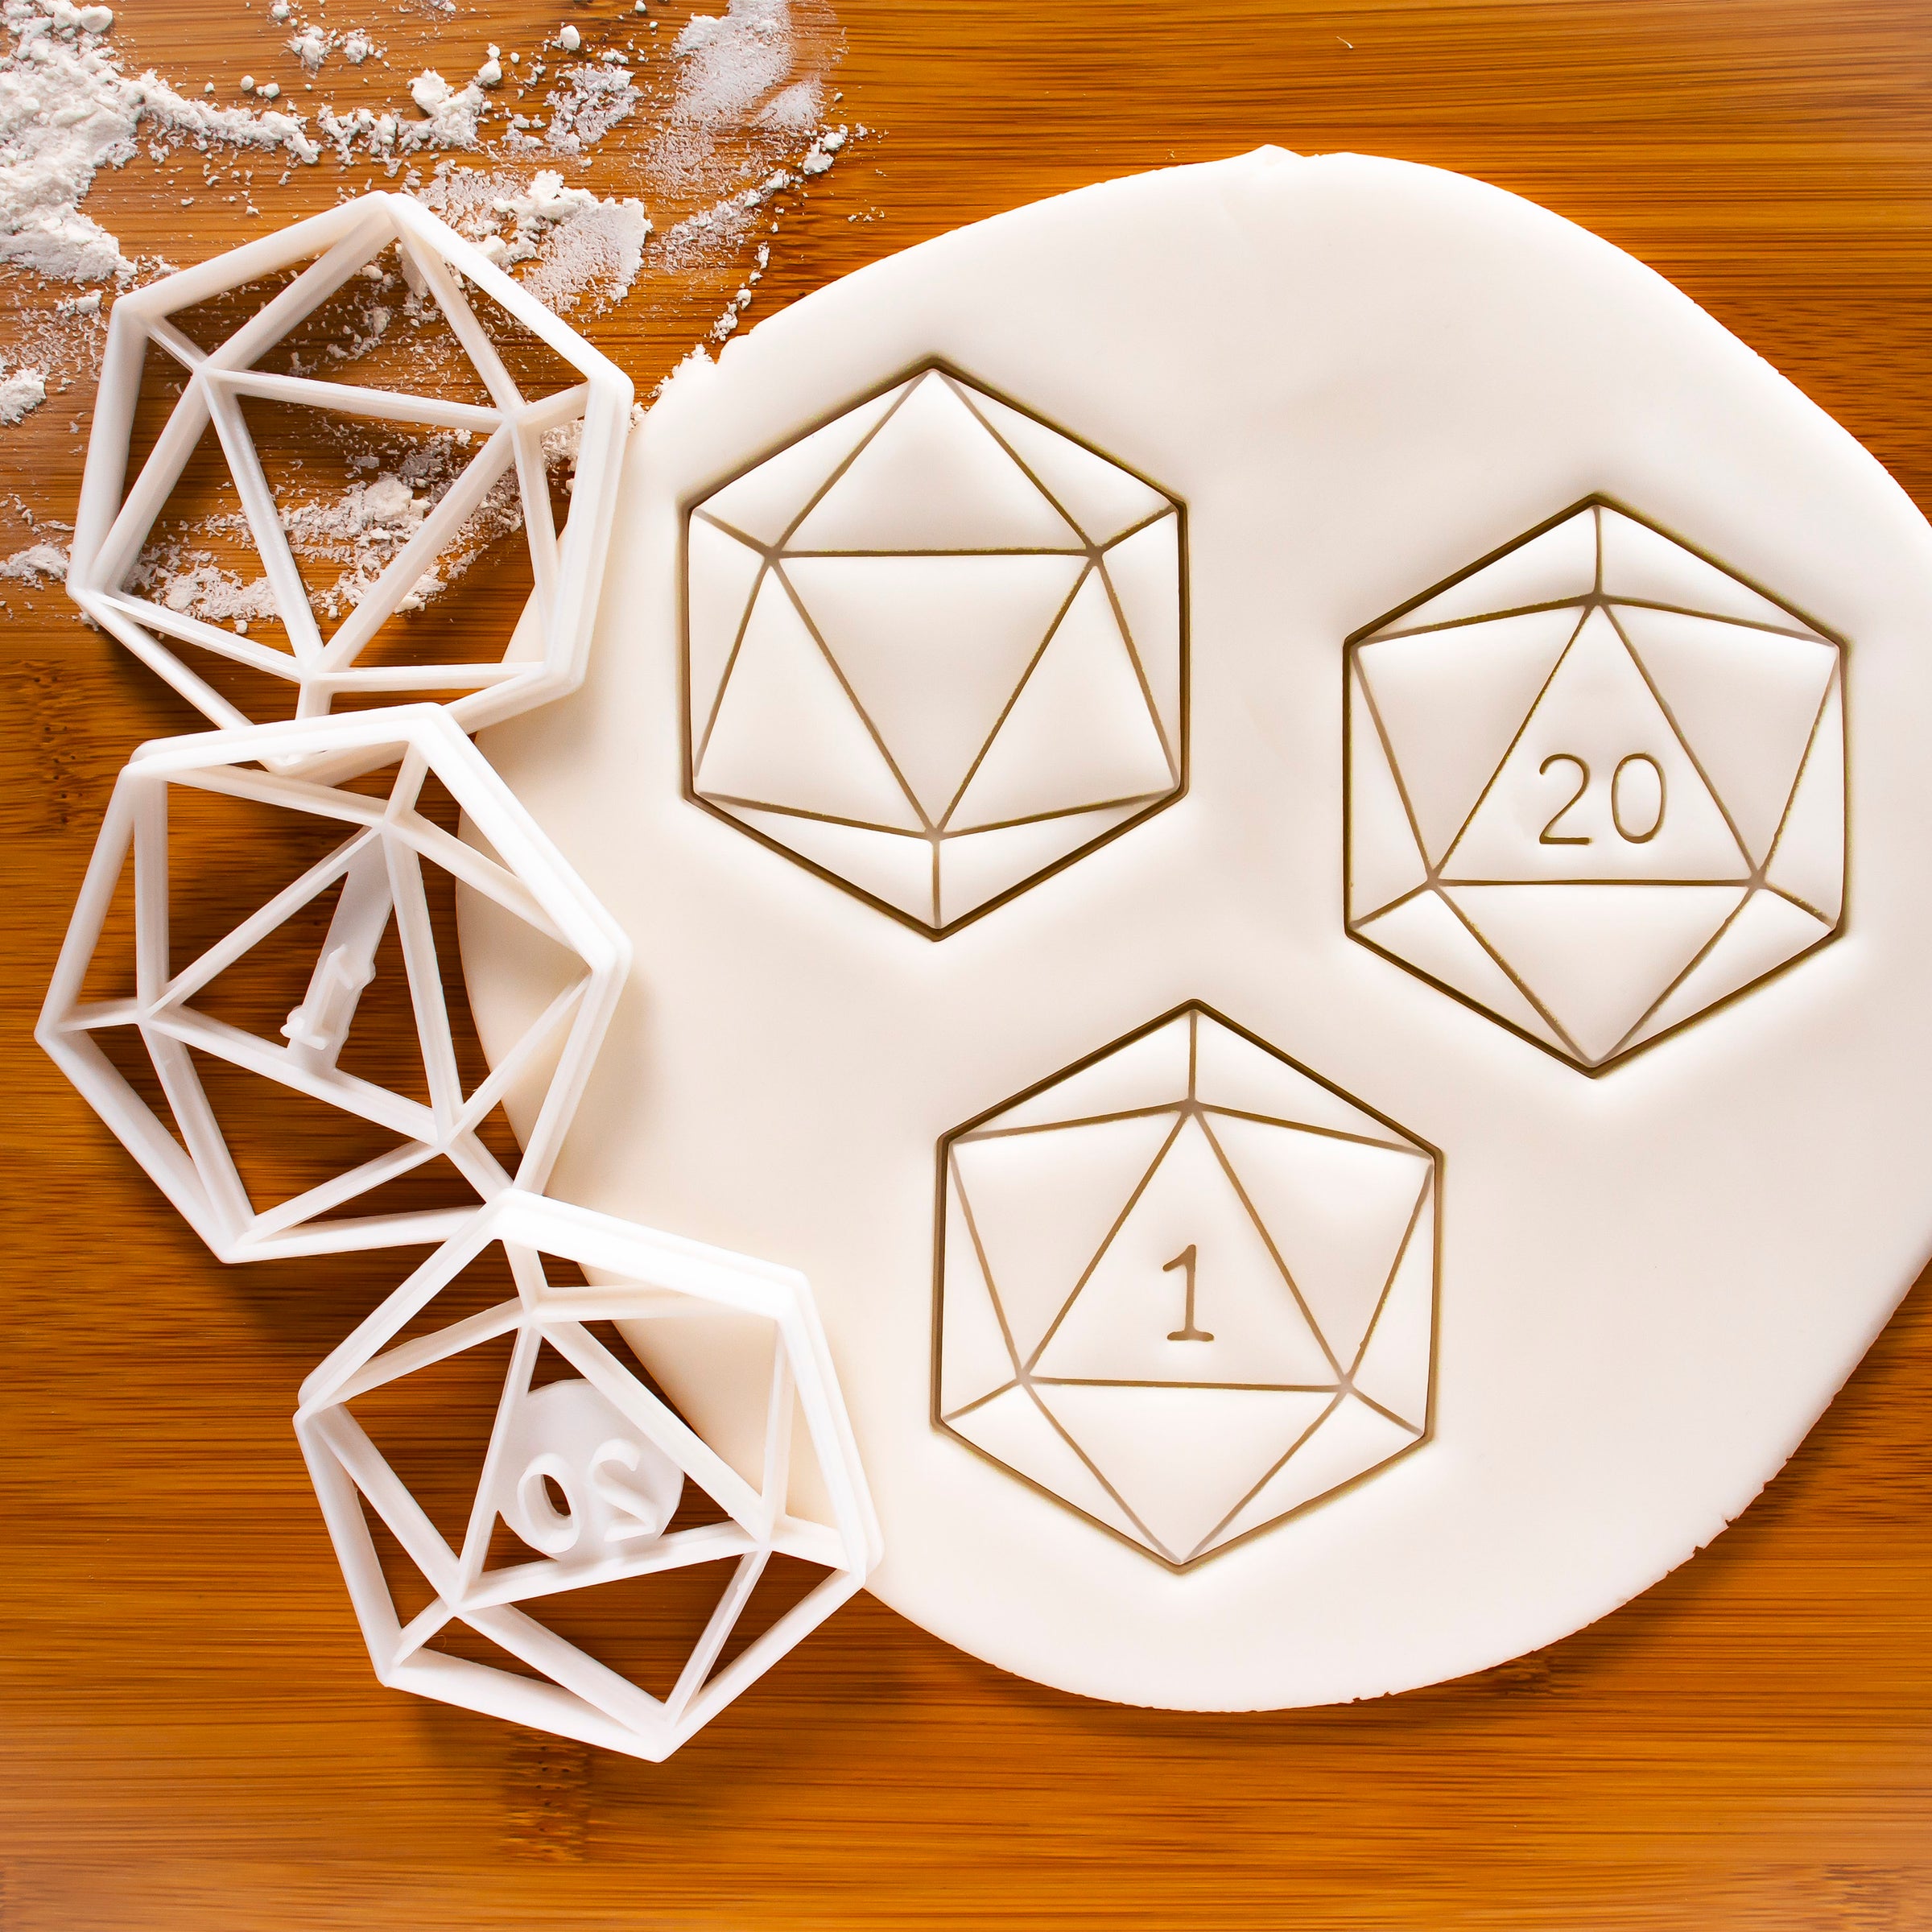 Set of 3 Cookie Cutters - Icosahedron, Natural 1, and Natural 20